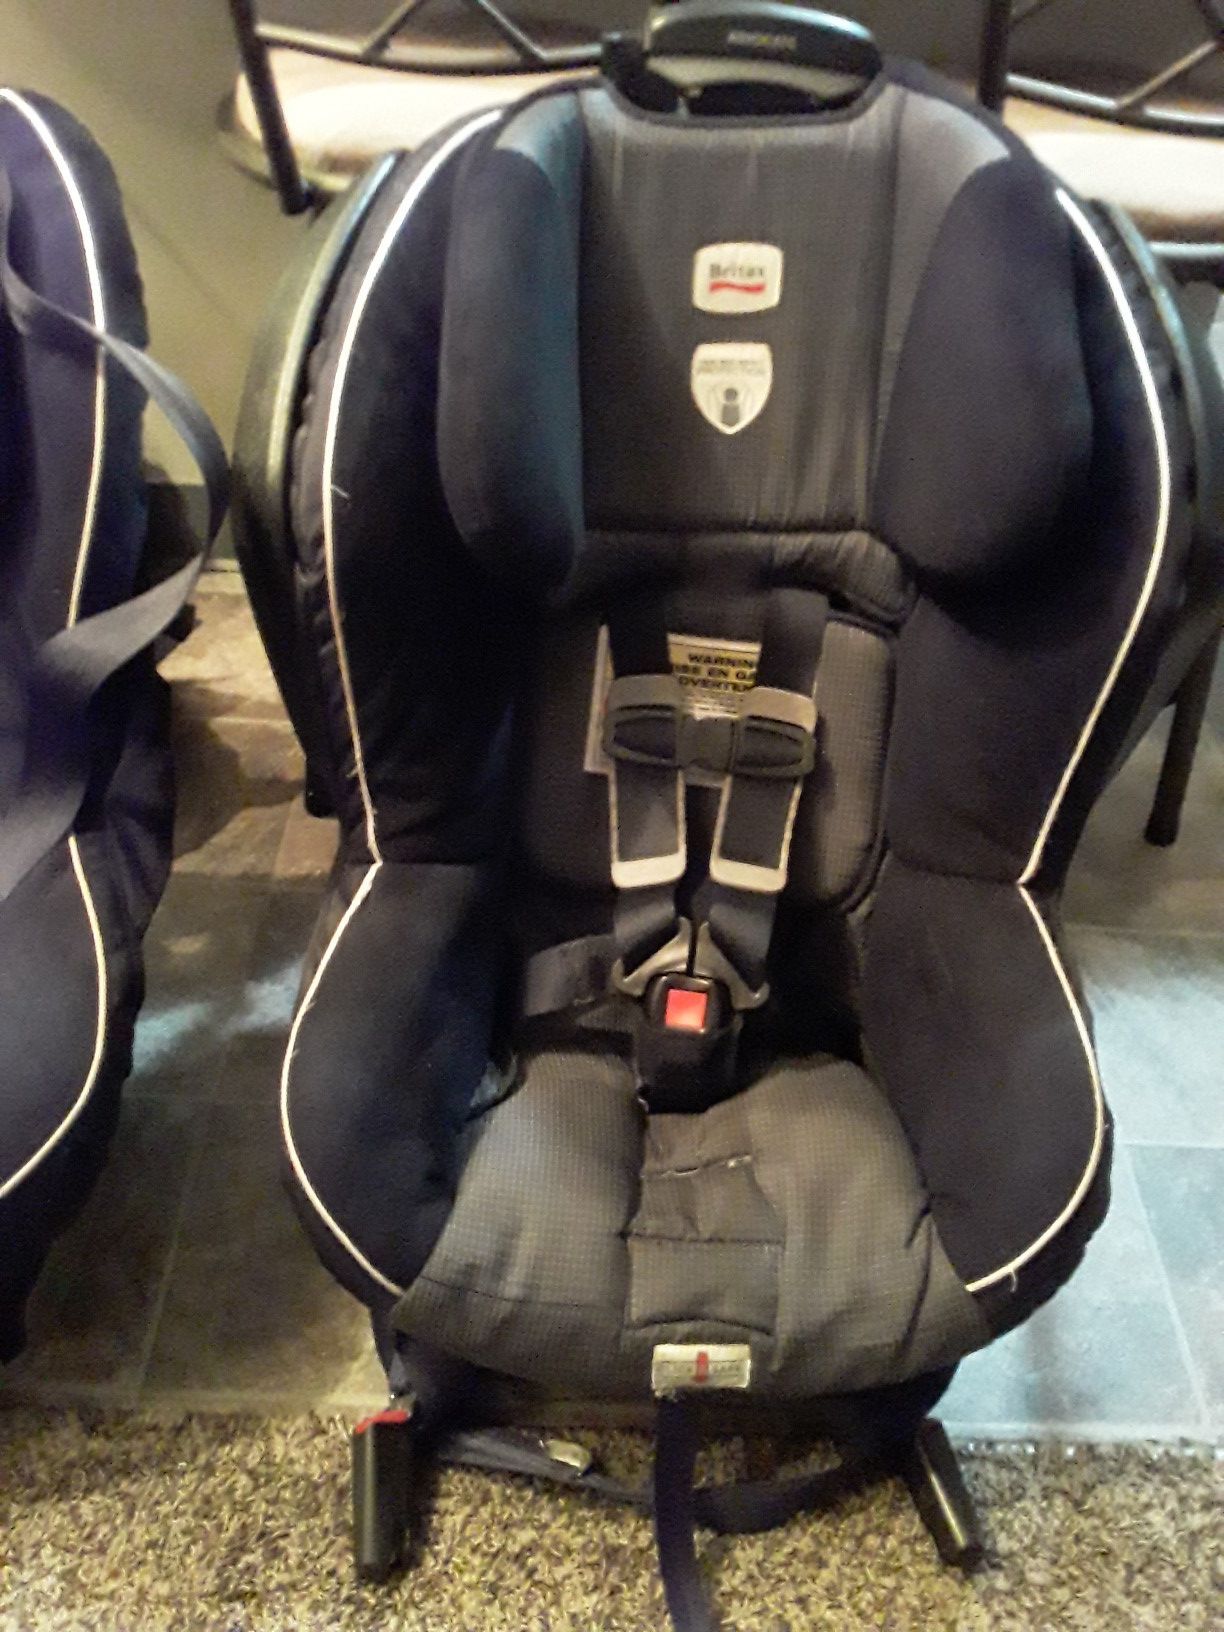 "BRITAX ADVOCATE" child car seat is within saftey standards within 6 years of manufacture date